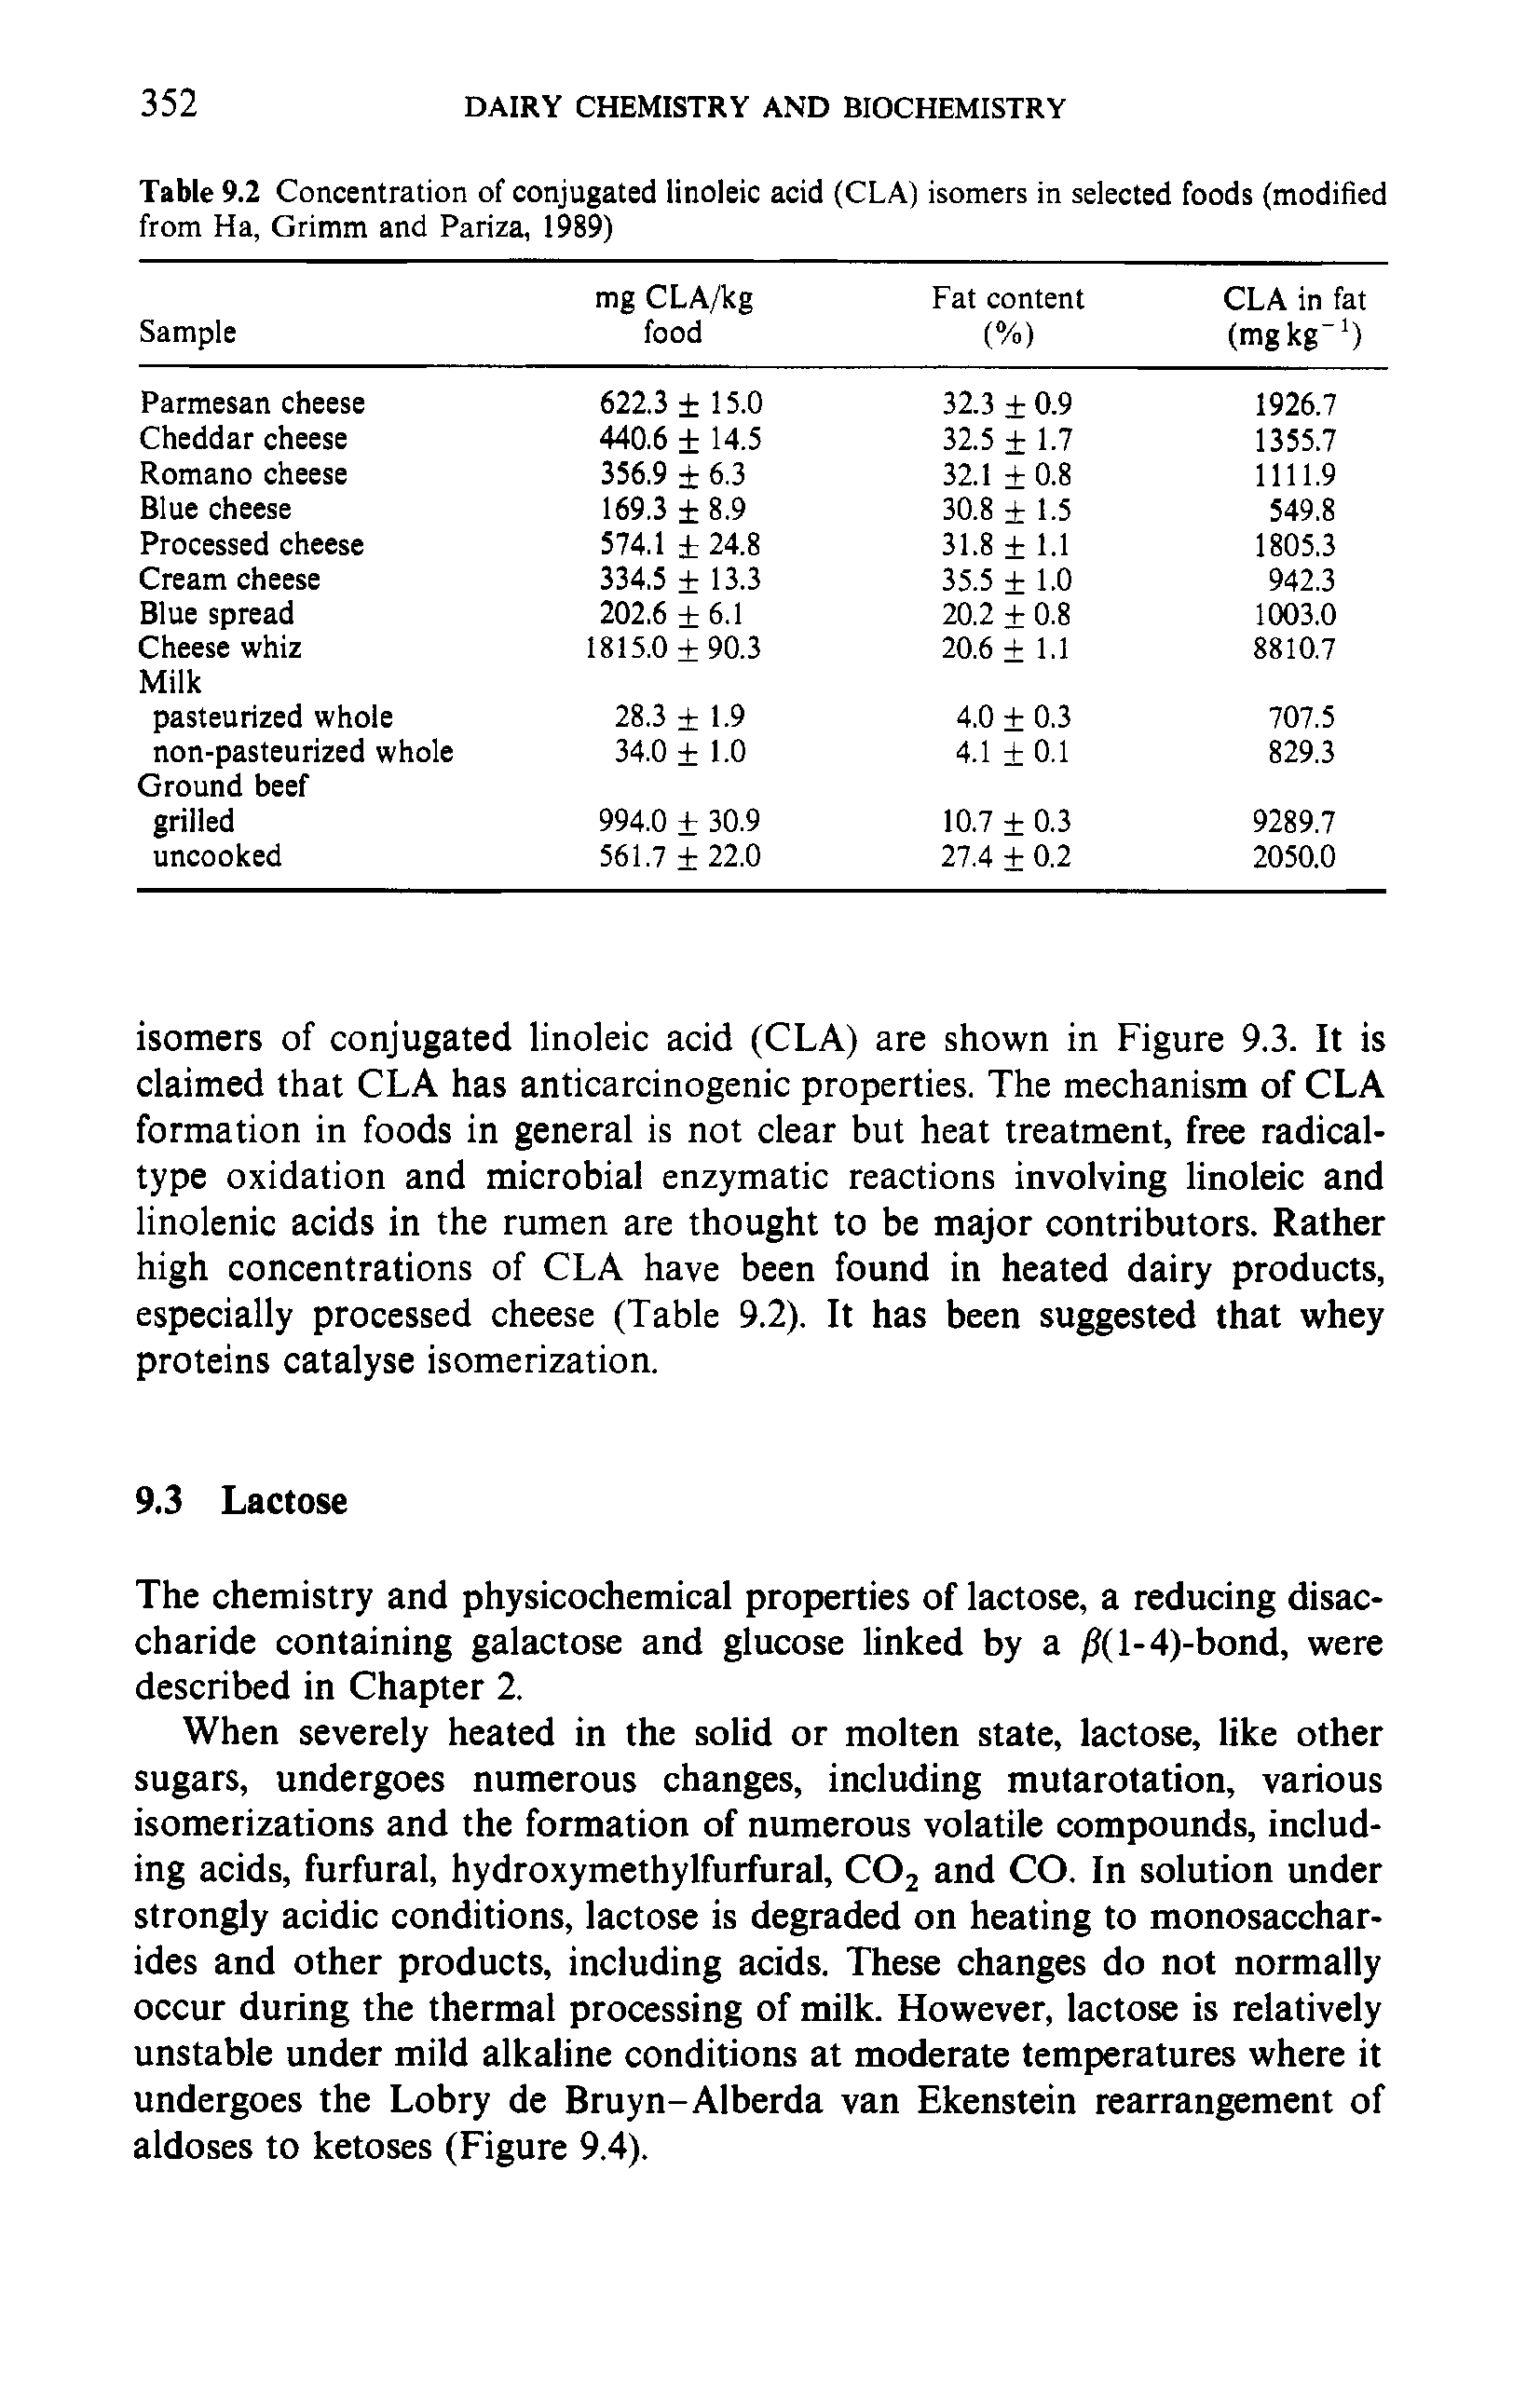 Table 9.2 Concentration of conjugated linoleic acid (CLA) isomers in selected foods (modified from Ha, Grimm and Pariza, 1989)...